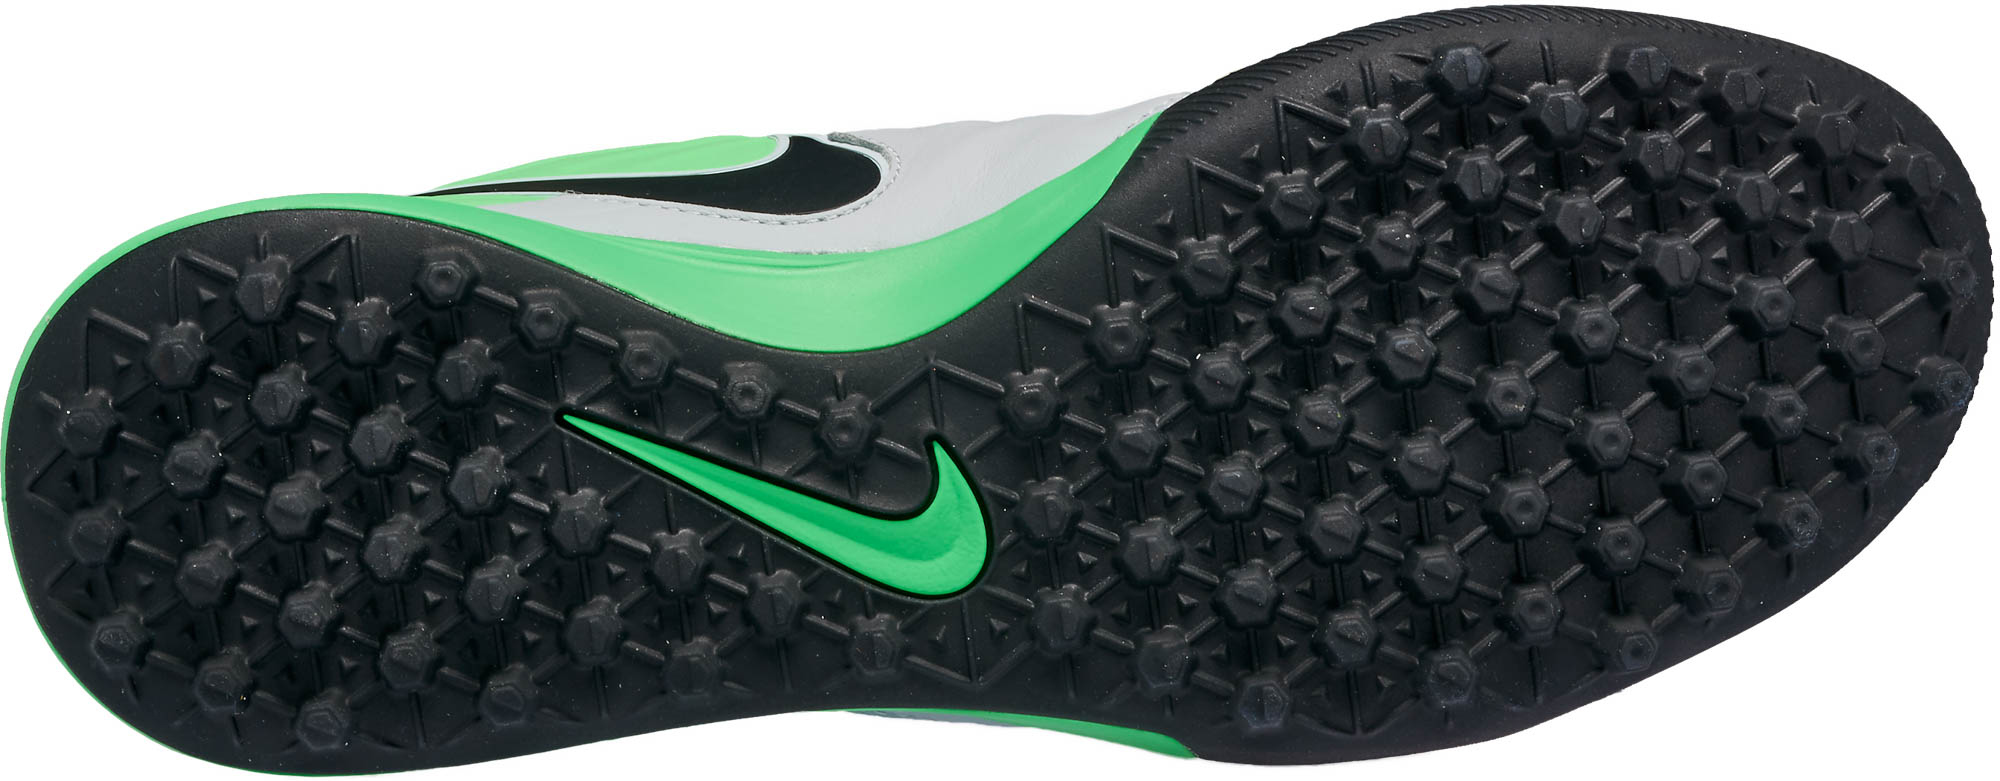 Plausible Hija Cívico Nike TiempoX Proximo TF Soccer Shoes - Nike SCCRX Shoes